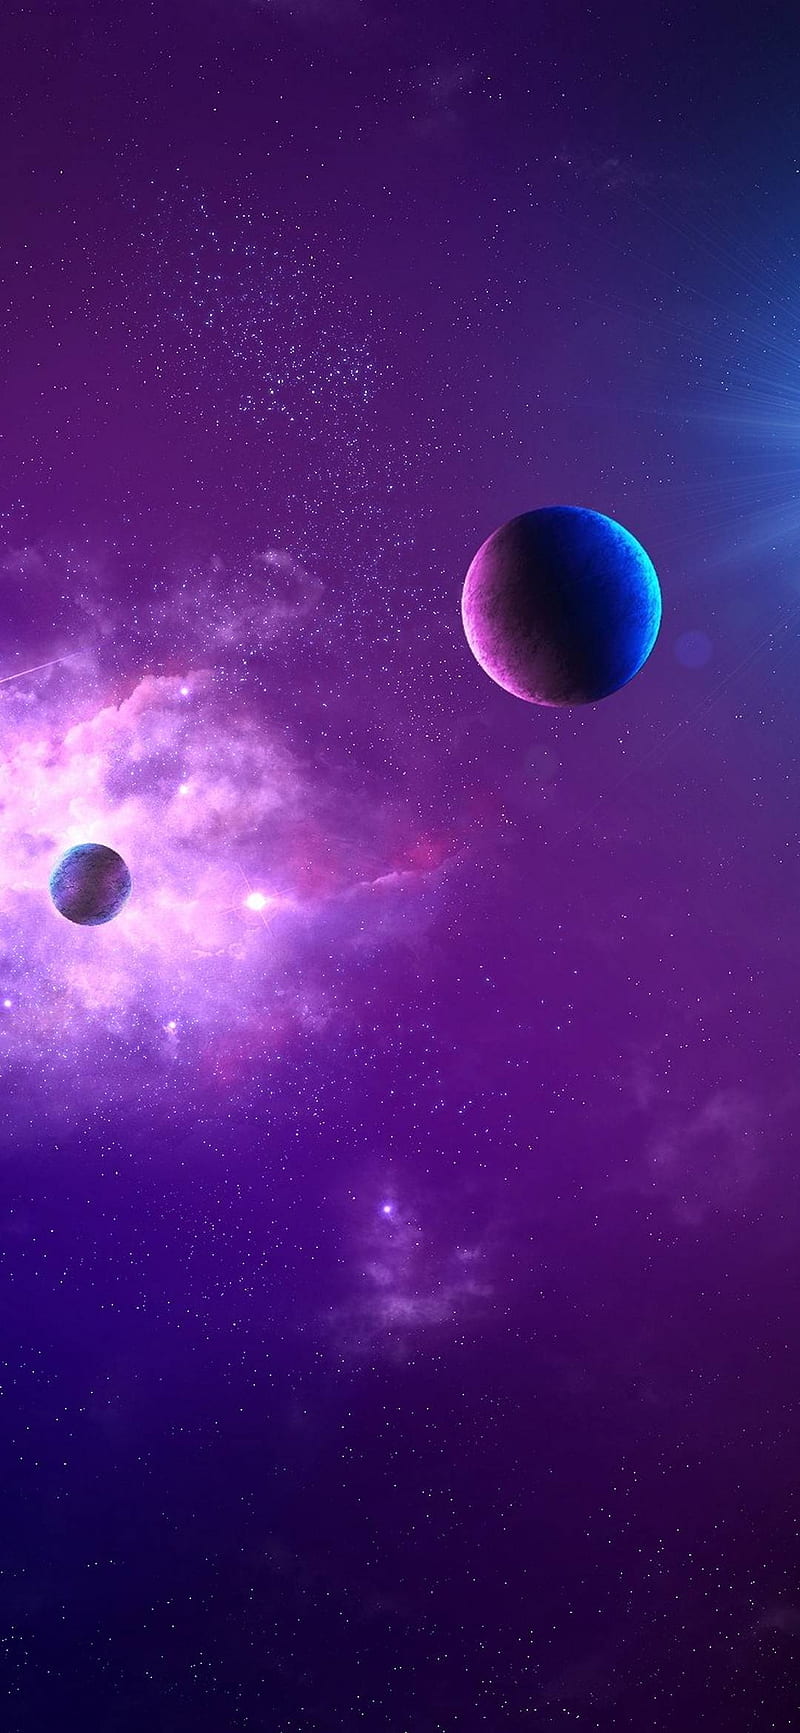 Space99, cosmos, eclipse, galaxy, mix, purple, HD phone wallpaper